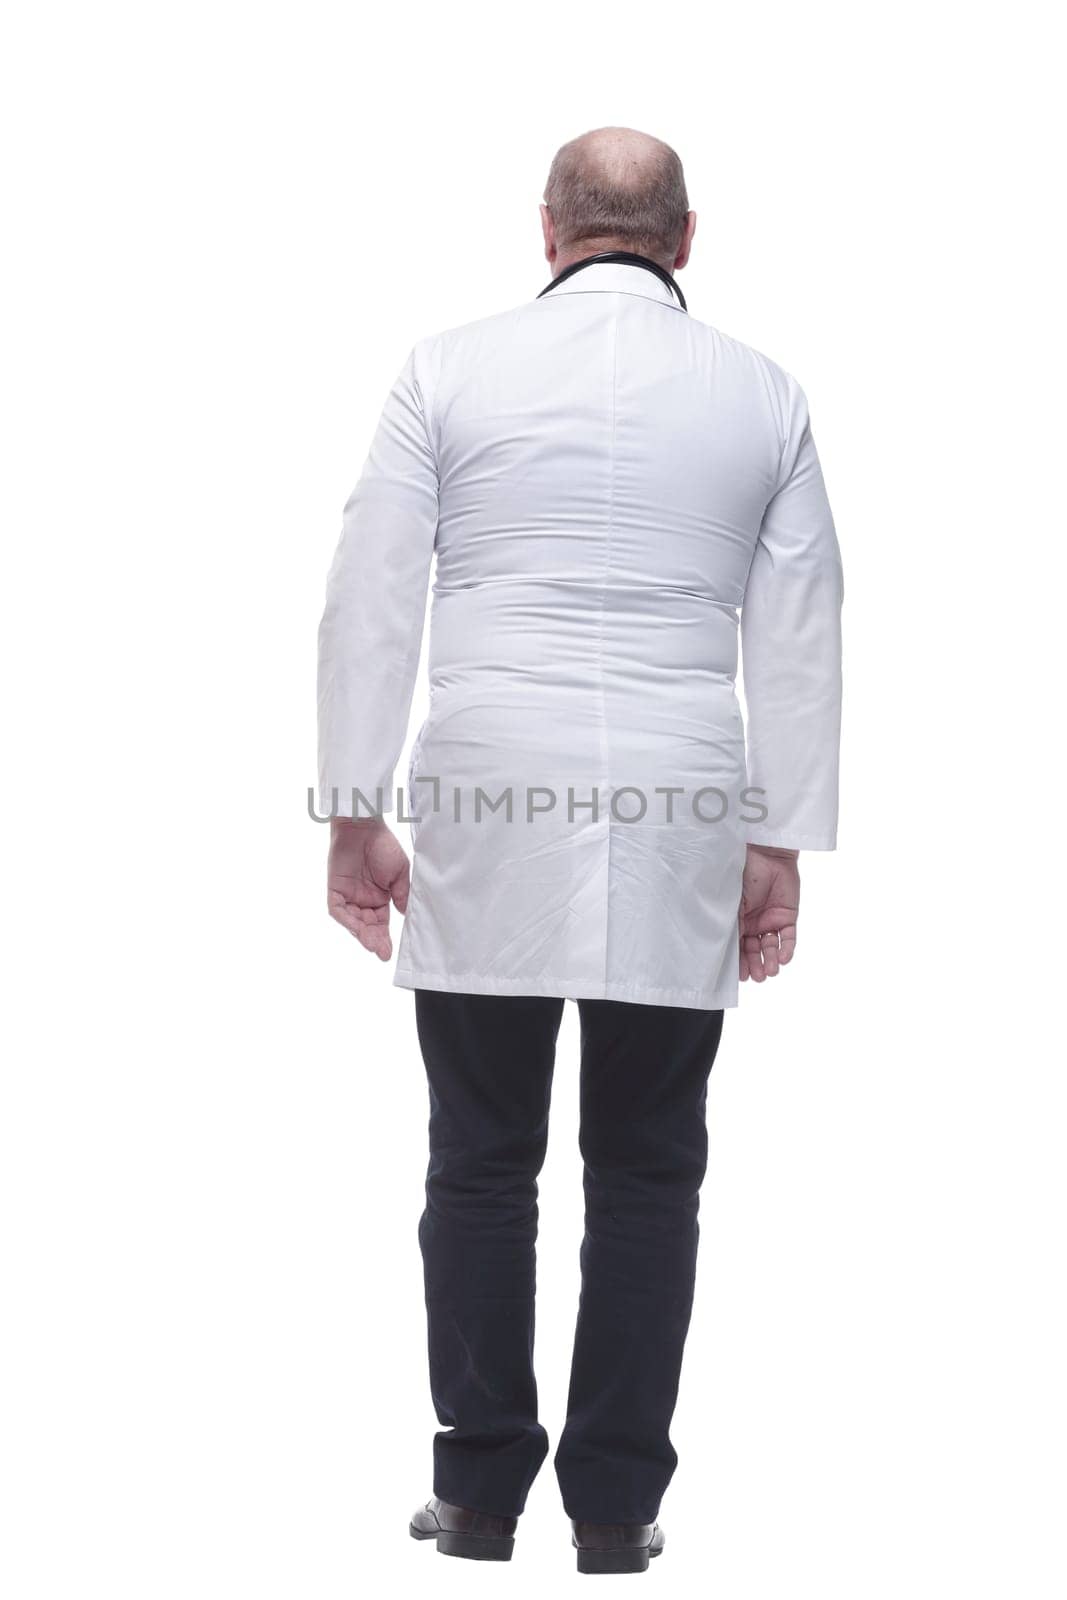 rear view. doctor-therapist reading an ad on a white screen. isolated on a white background